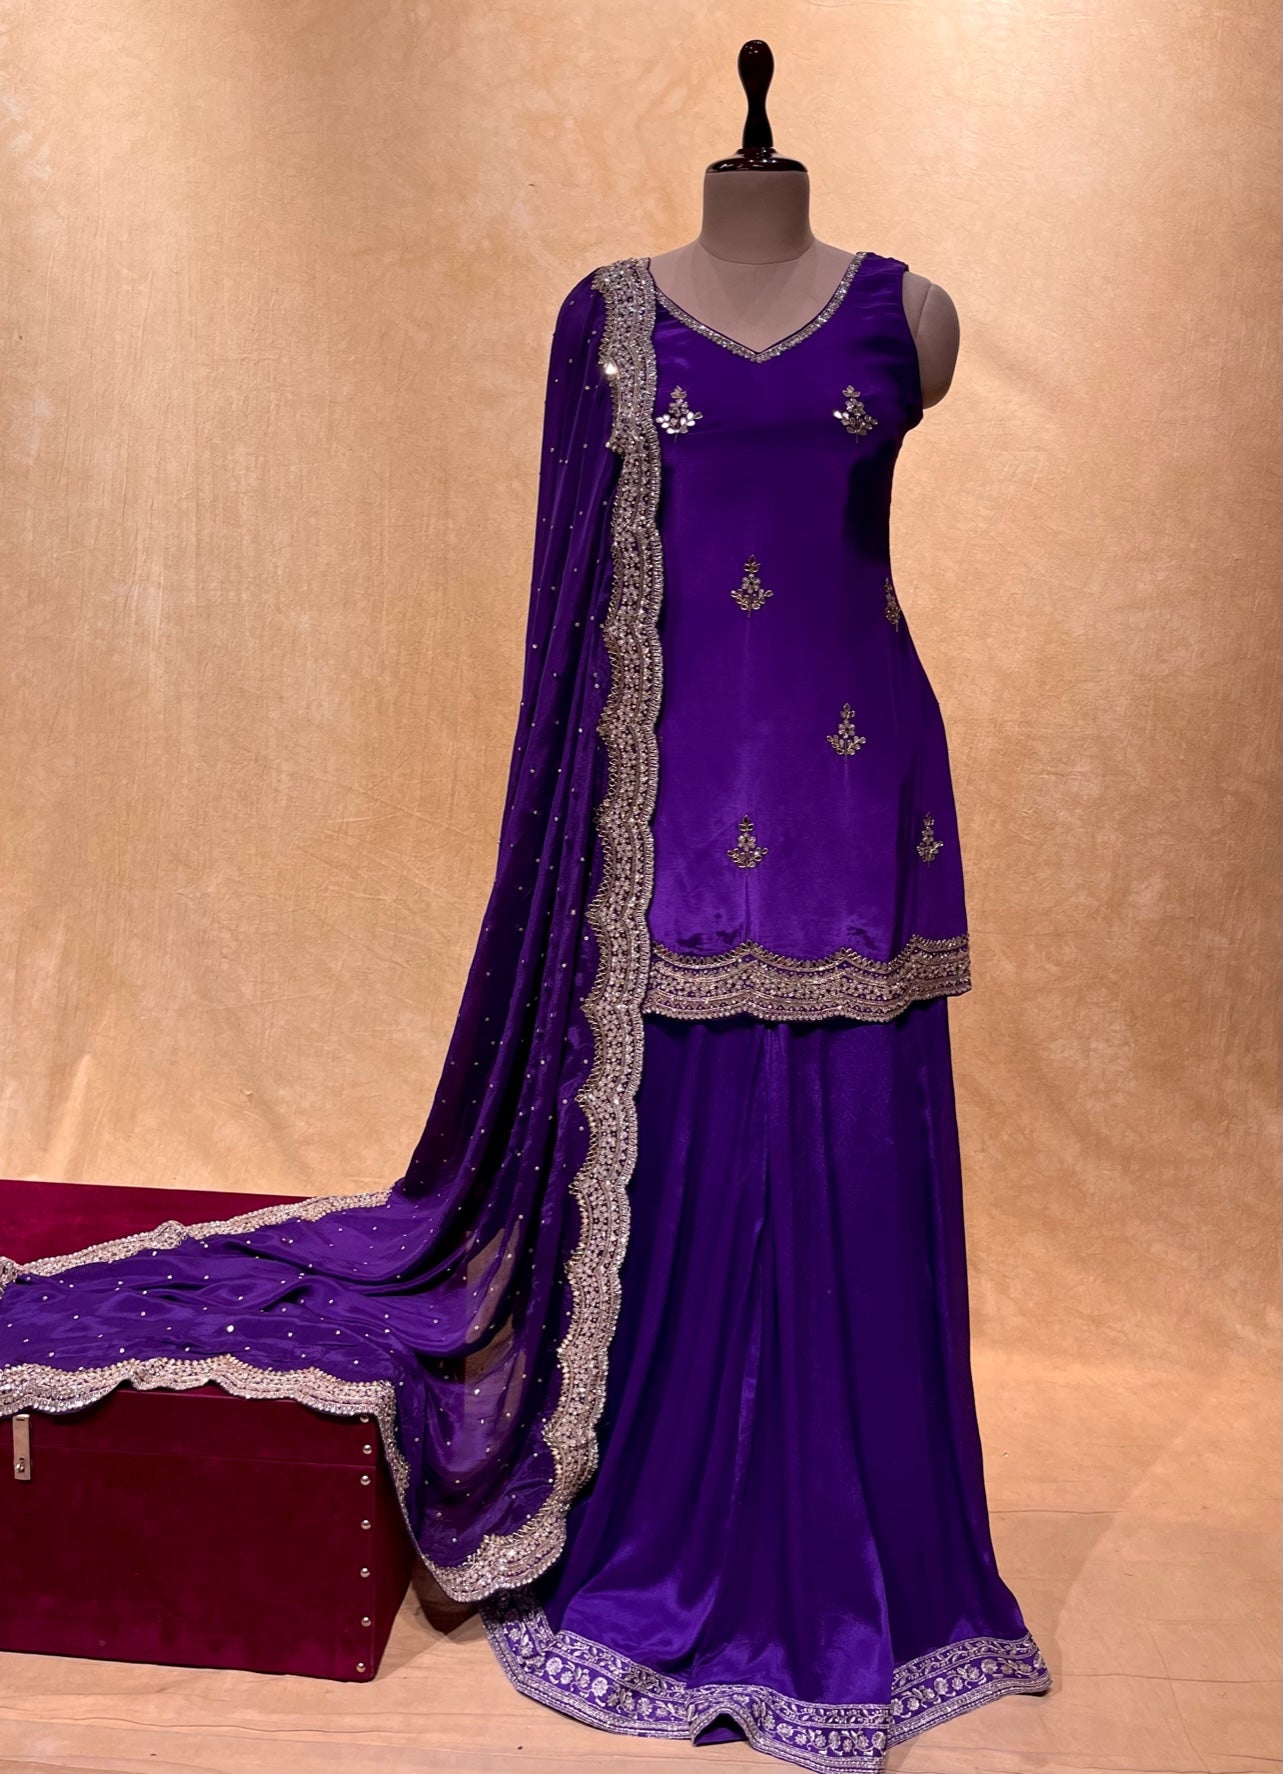 PURPLE COLOUR CHINON PALAZO WITH HAND EMBROIDERED CREPE SILK KURTA FOR WOMEN EMBELLISHED WITH CUTDANA, SEQUINS & ZARDOZI WORK